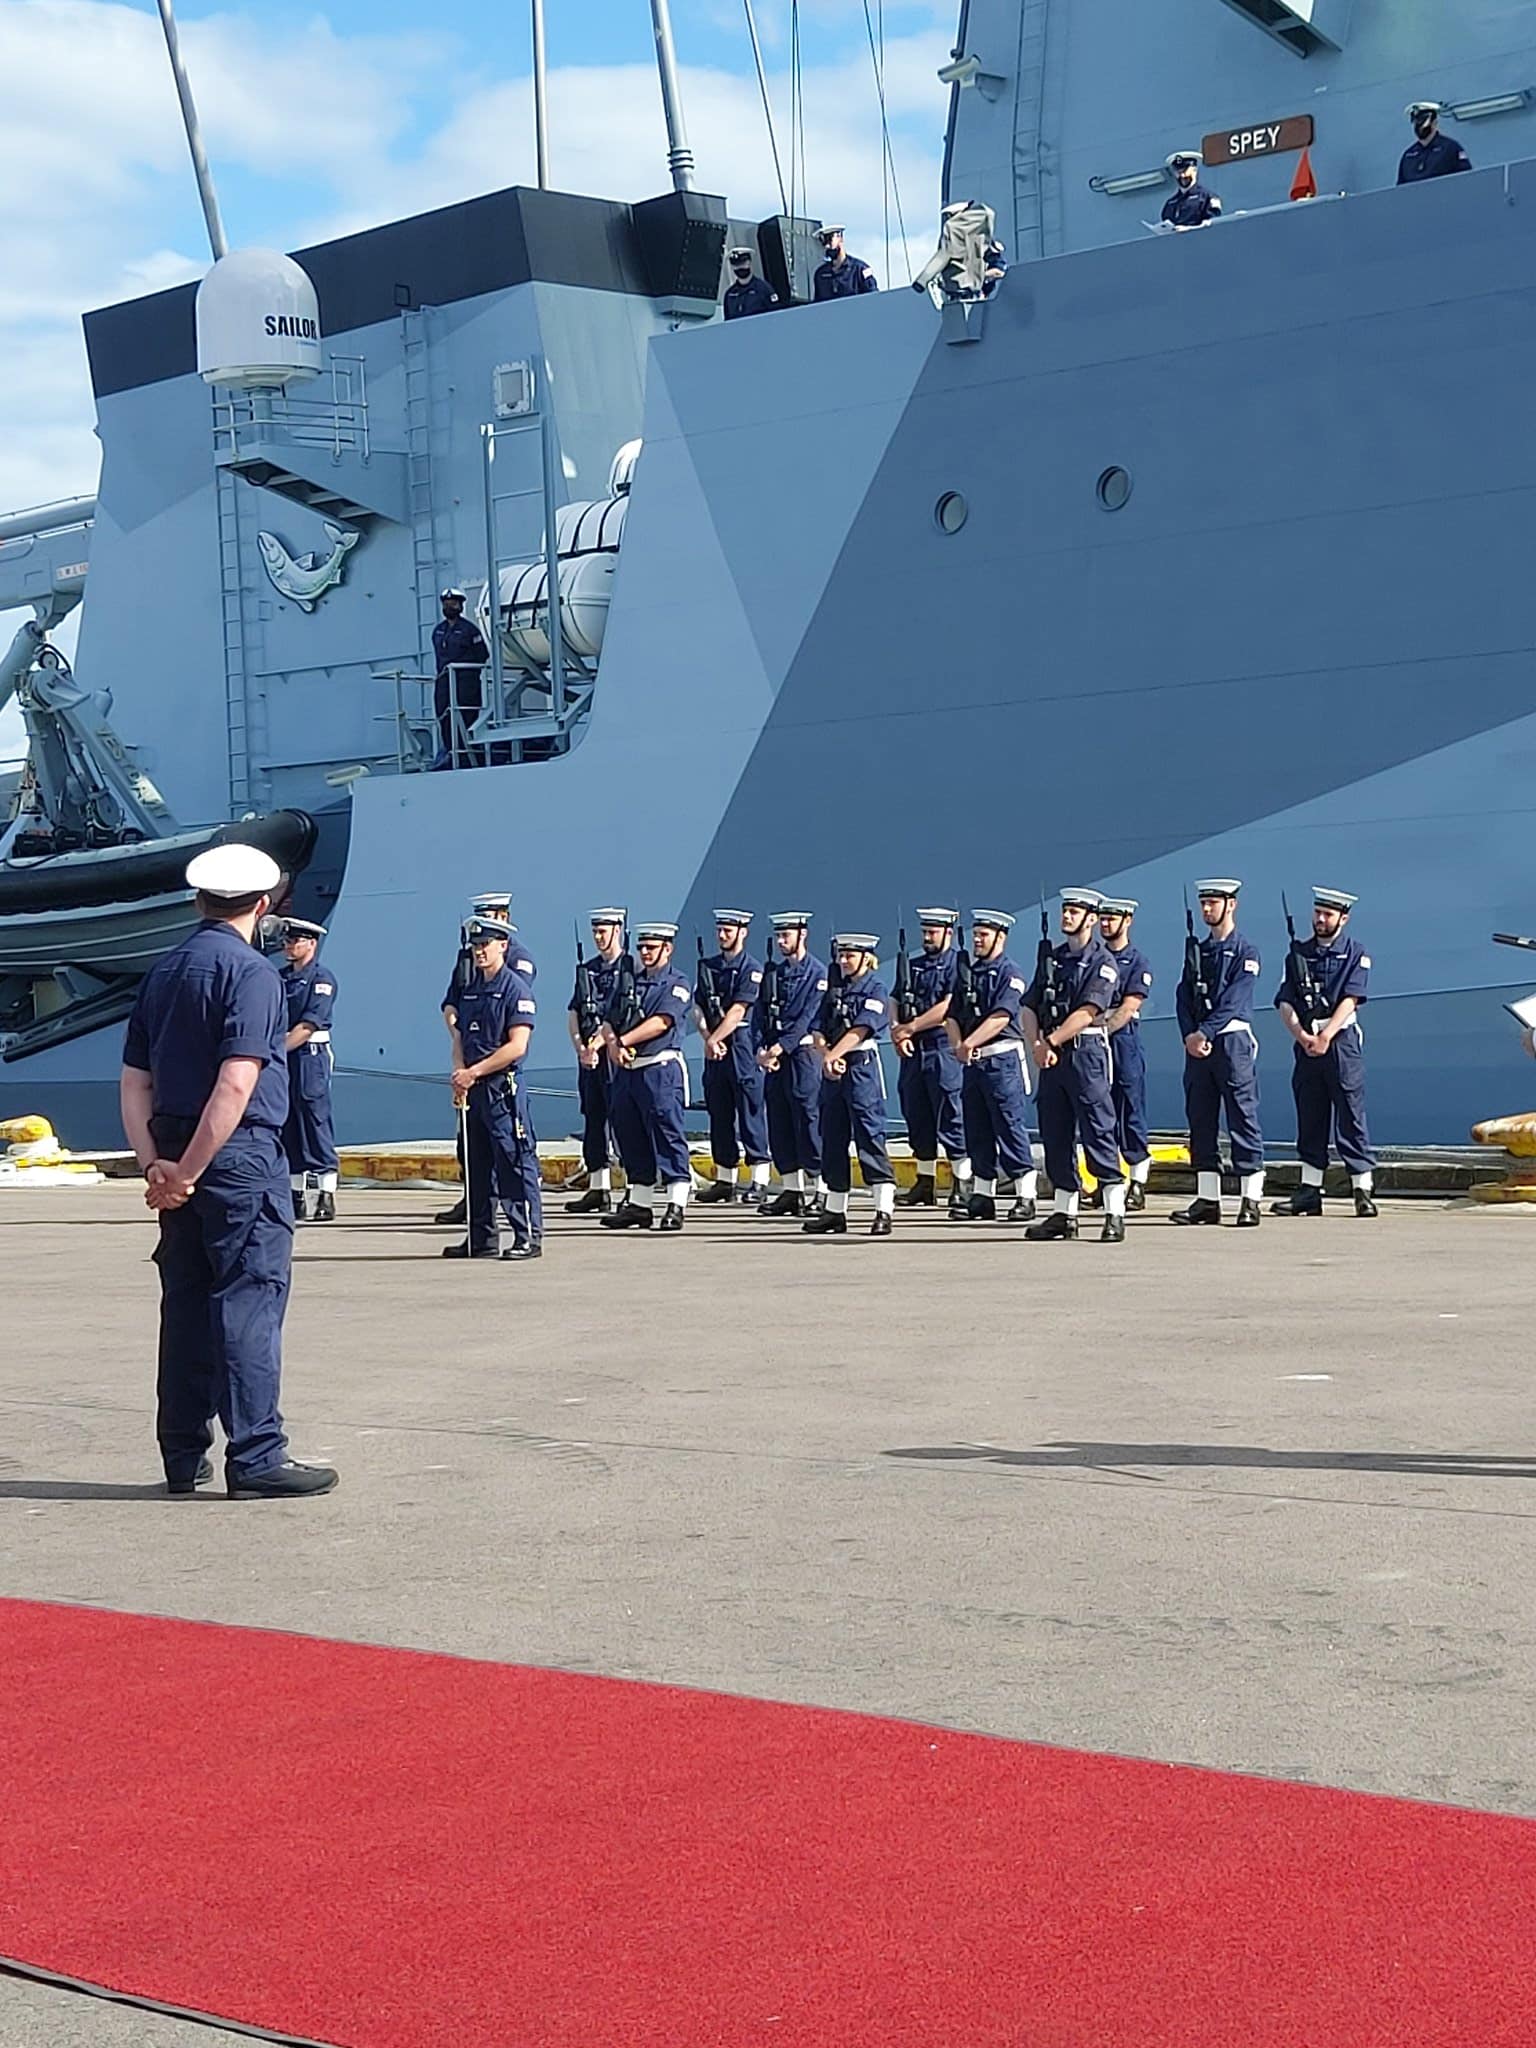 HMS Spey rehearsing their commissioning on June 17.